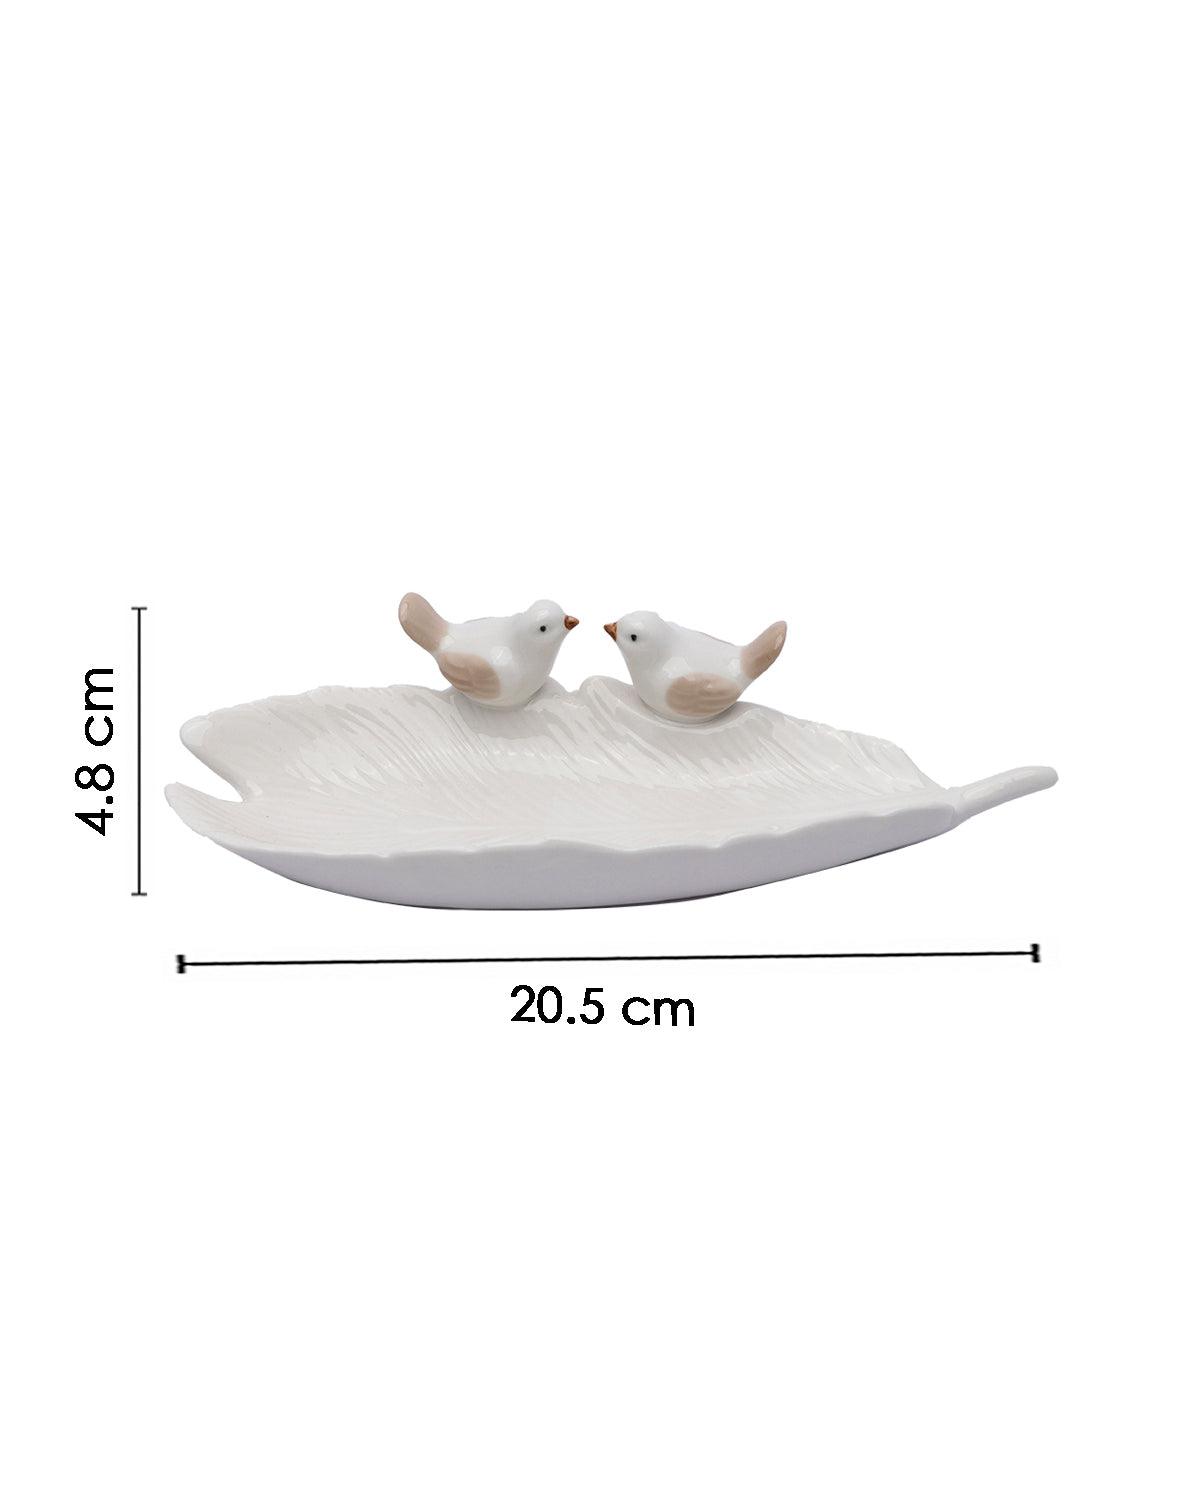 Jewellery Holder Tray, Crafted Bird, for Dressing Table, Ring Dash, Rectangular, White, Ceramic - MARKET 99